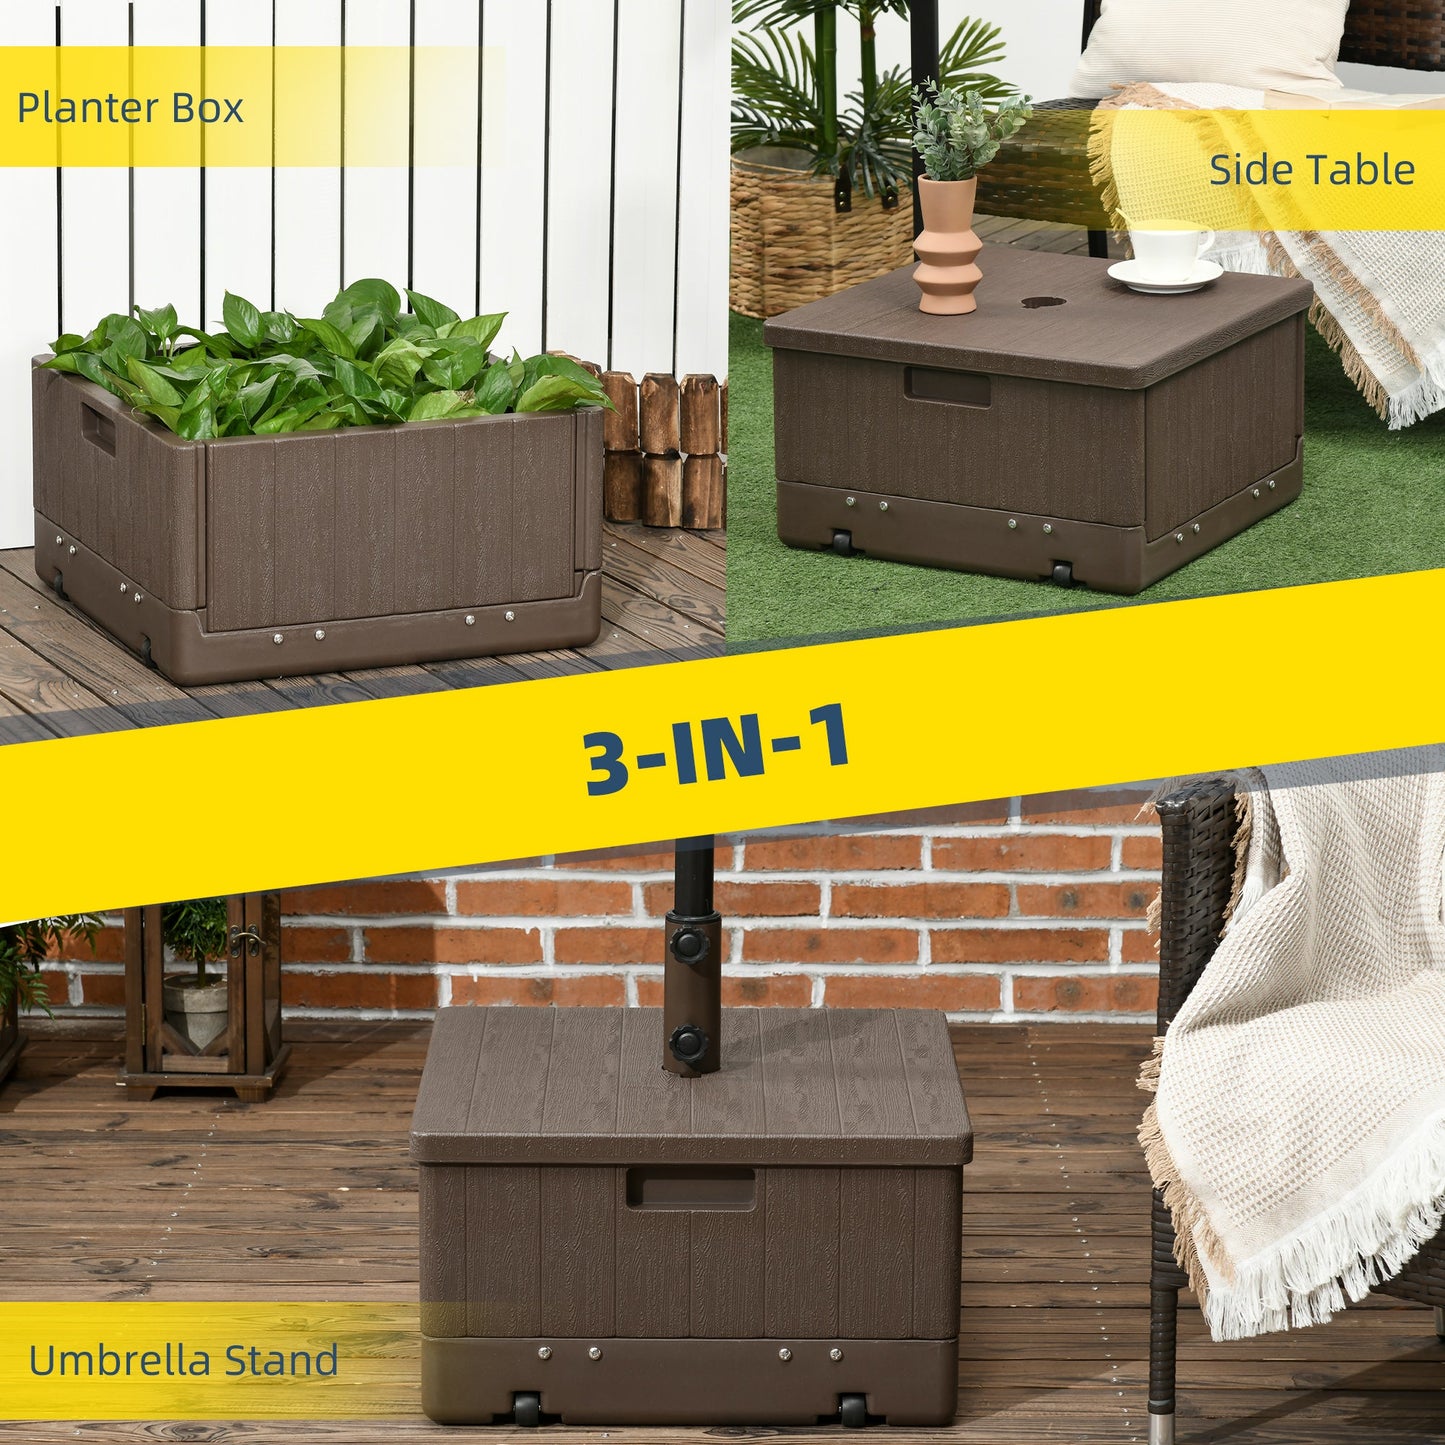 -Outsunny 3-In-1 Outdoor Umbrella Base, Coffee End Table Planter Box w/ Drainage, 175lbs Capacity Patio Umbrella Stand Table w/ Wheels & Handles, Brown - Outdoor Style Company